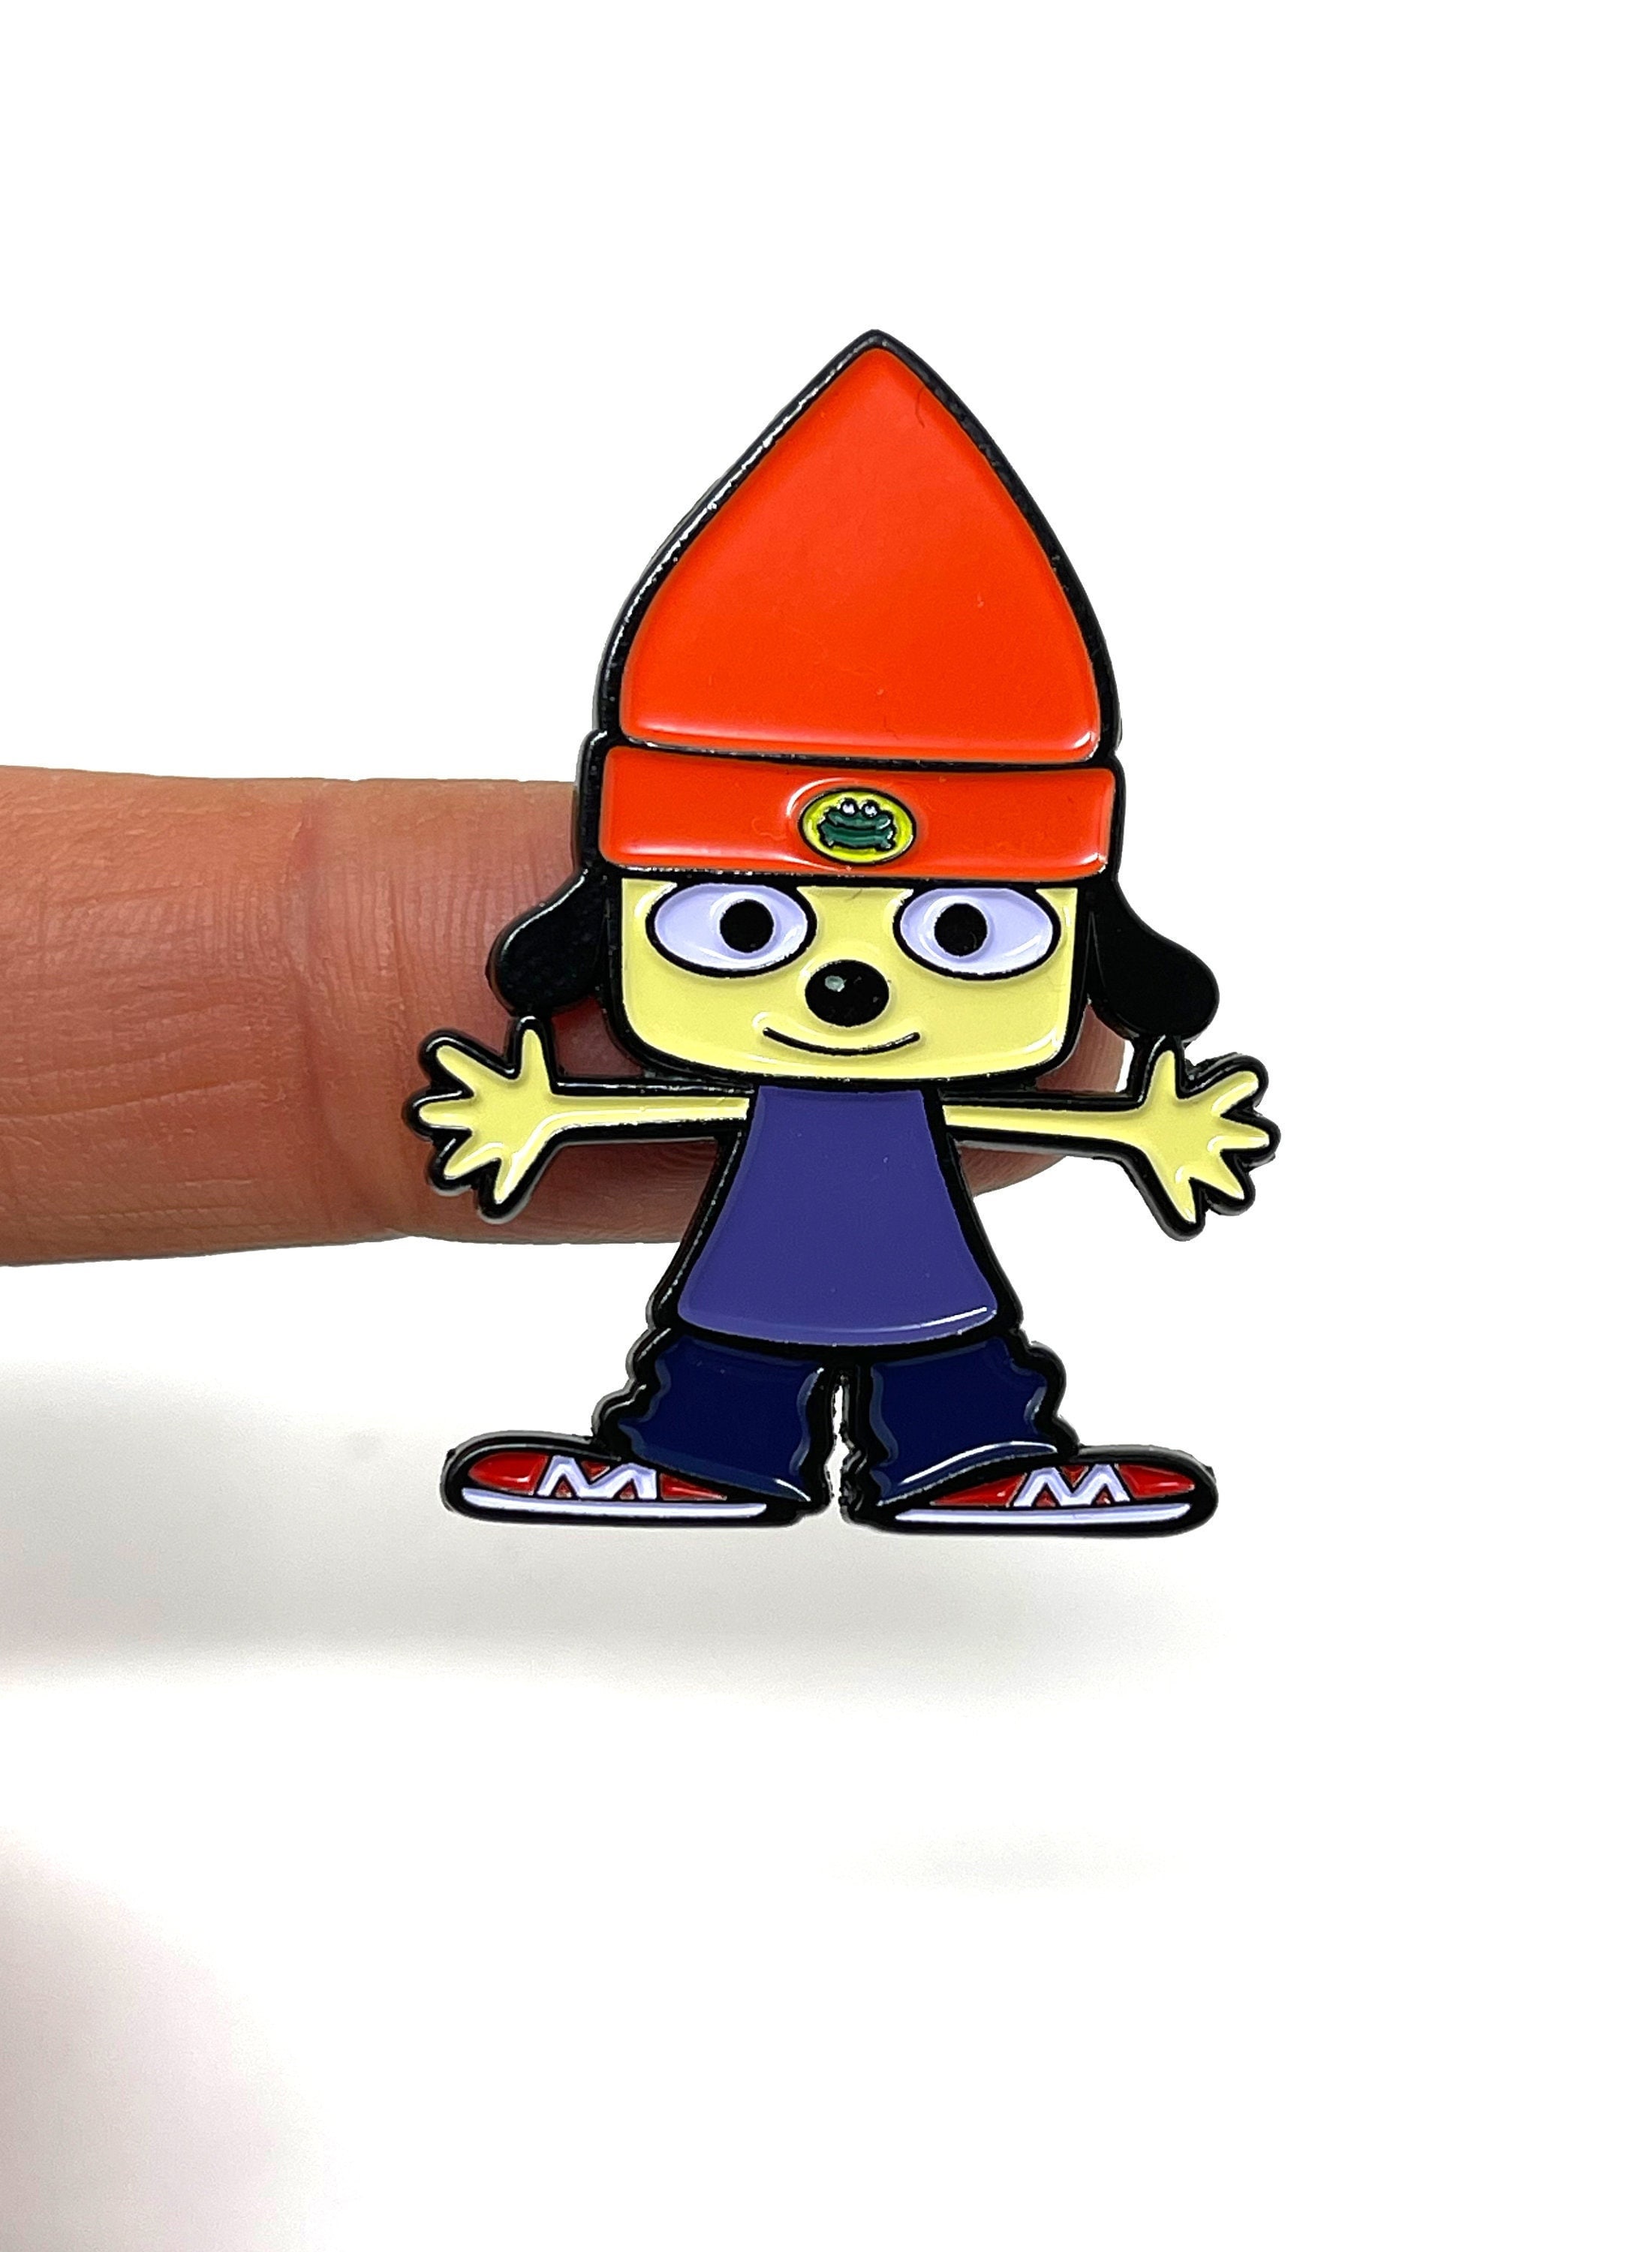 Get Your Groove On with Parappa the Rapper: Music, Games, and Anime Rap! |  Pin